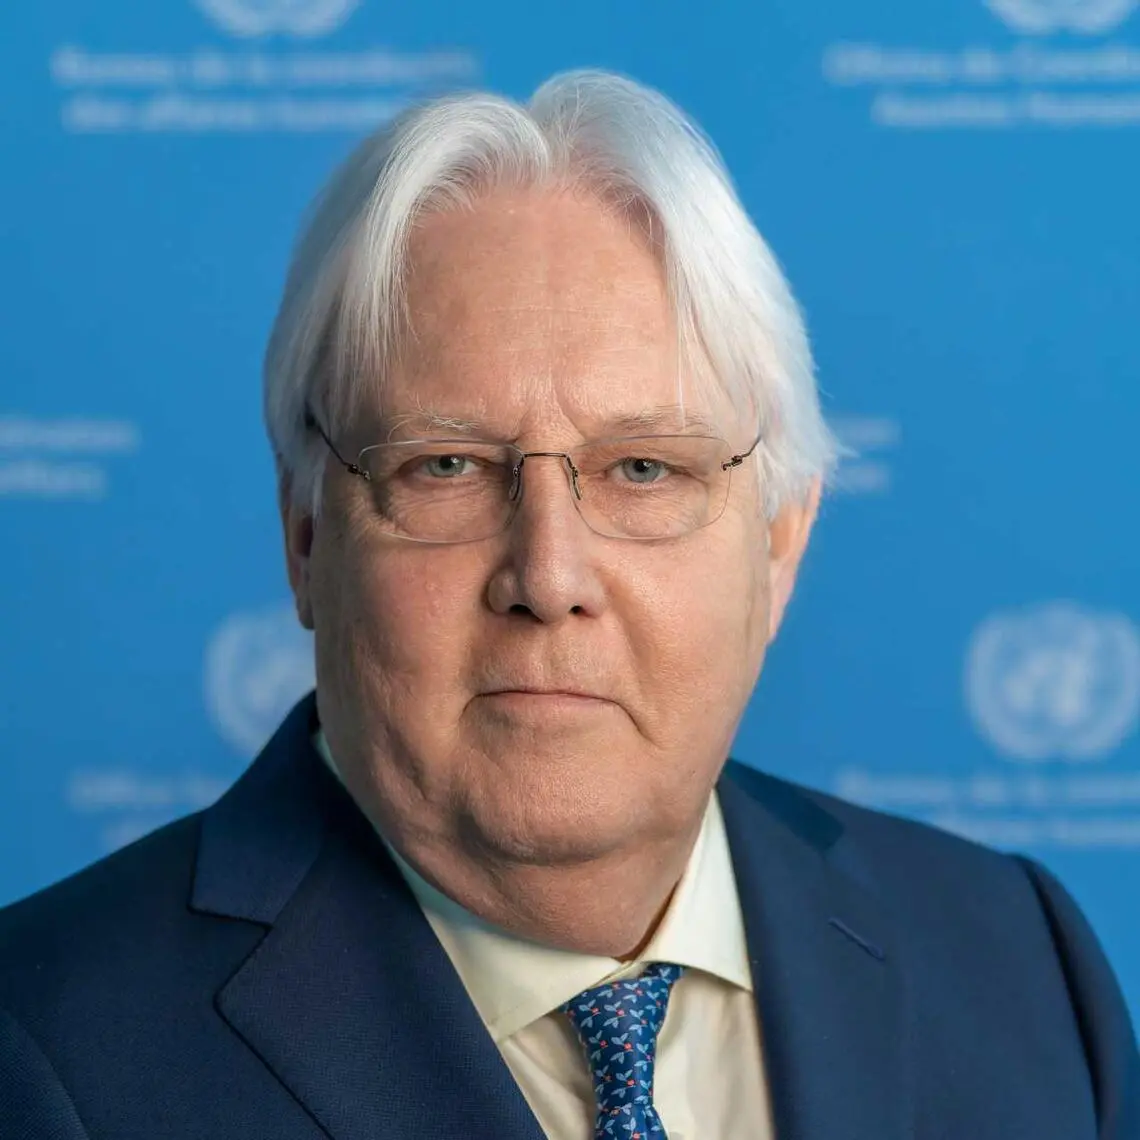 Mr. Martin Griffiths, Under-Secretary-General for Humanitarian Affairs and Emergency Relief Coordinator. Photo: UNOCHA